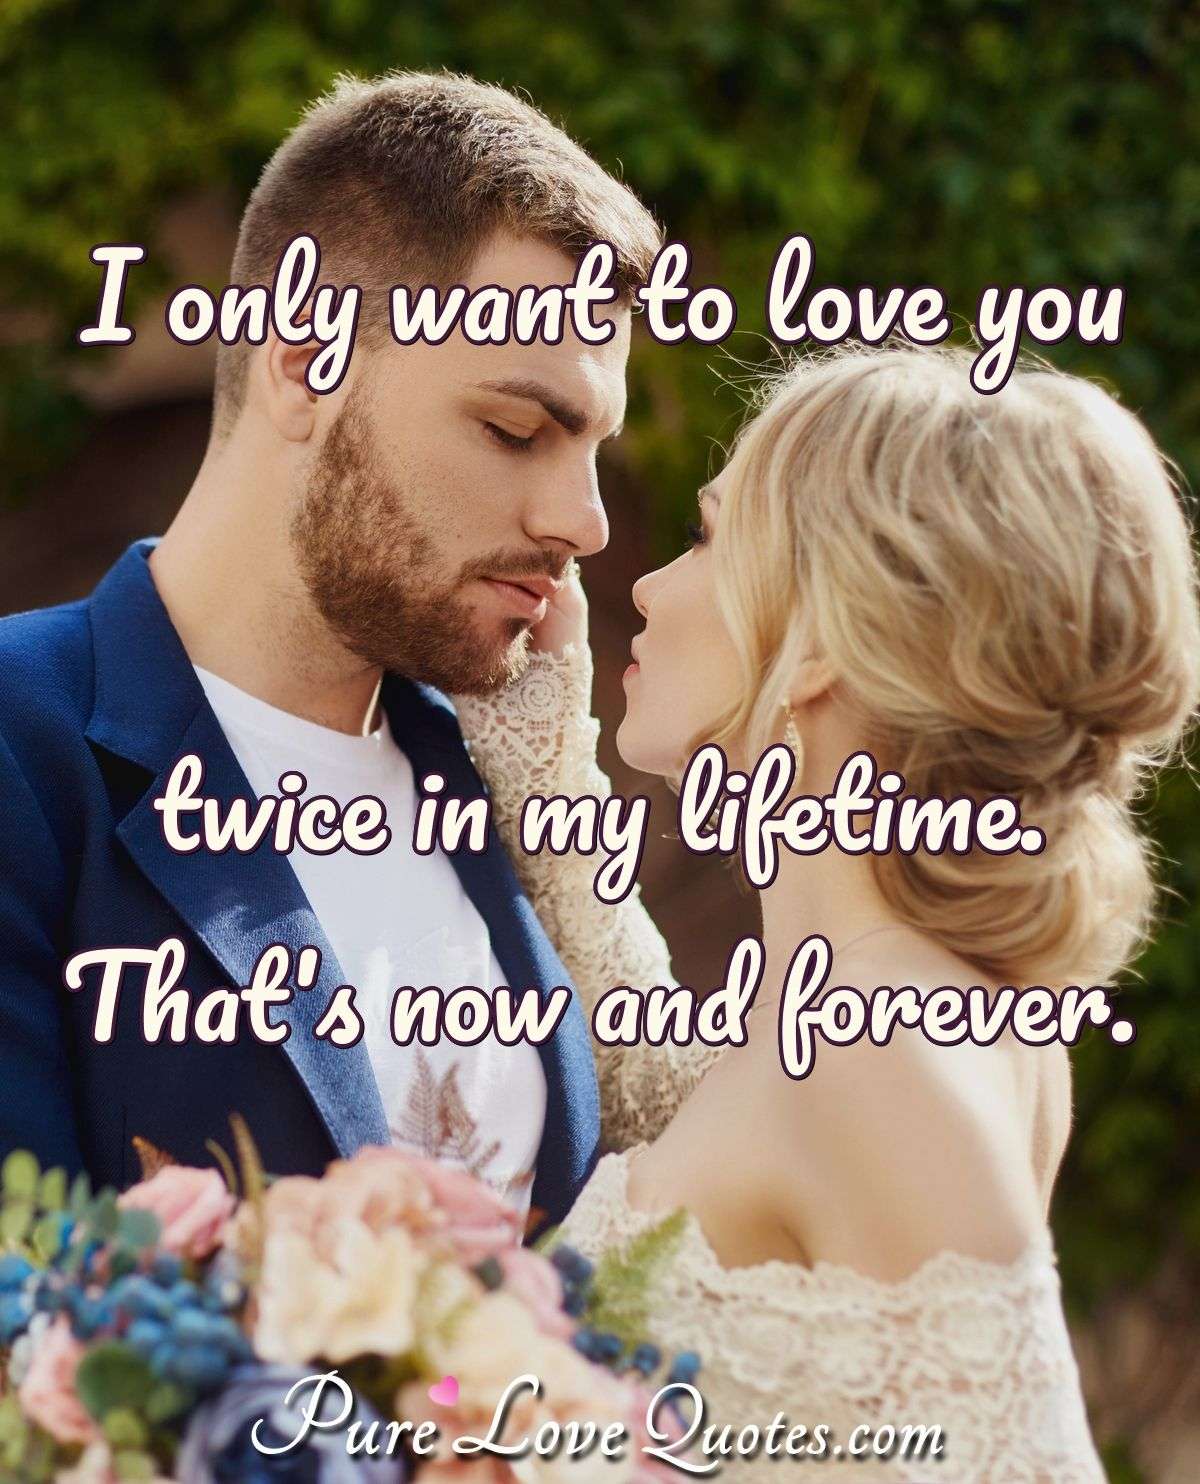 I only want to love you twice in my lifetime. That's now and forever. - Anonymous